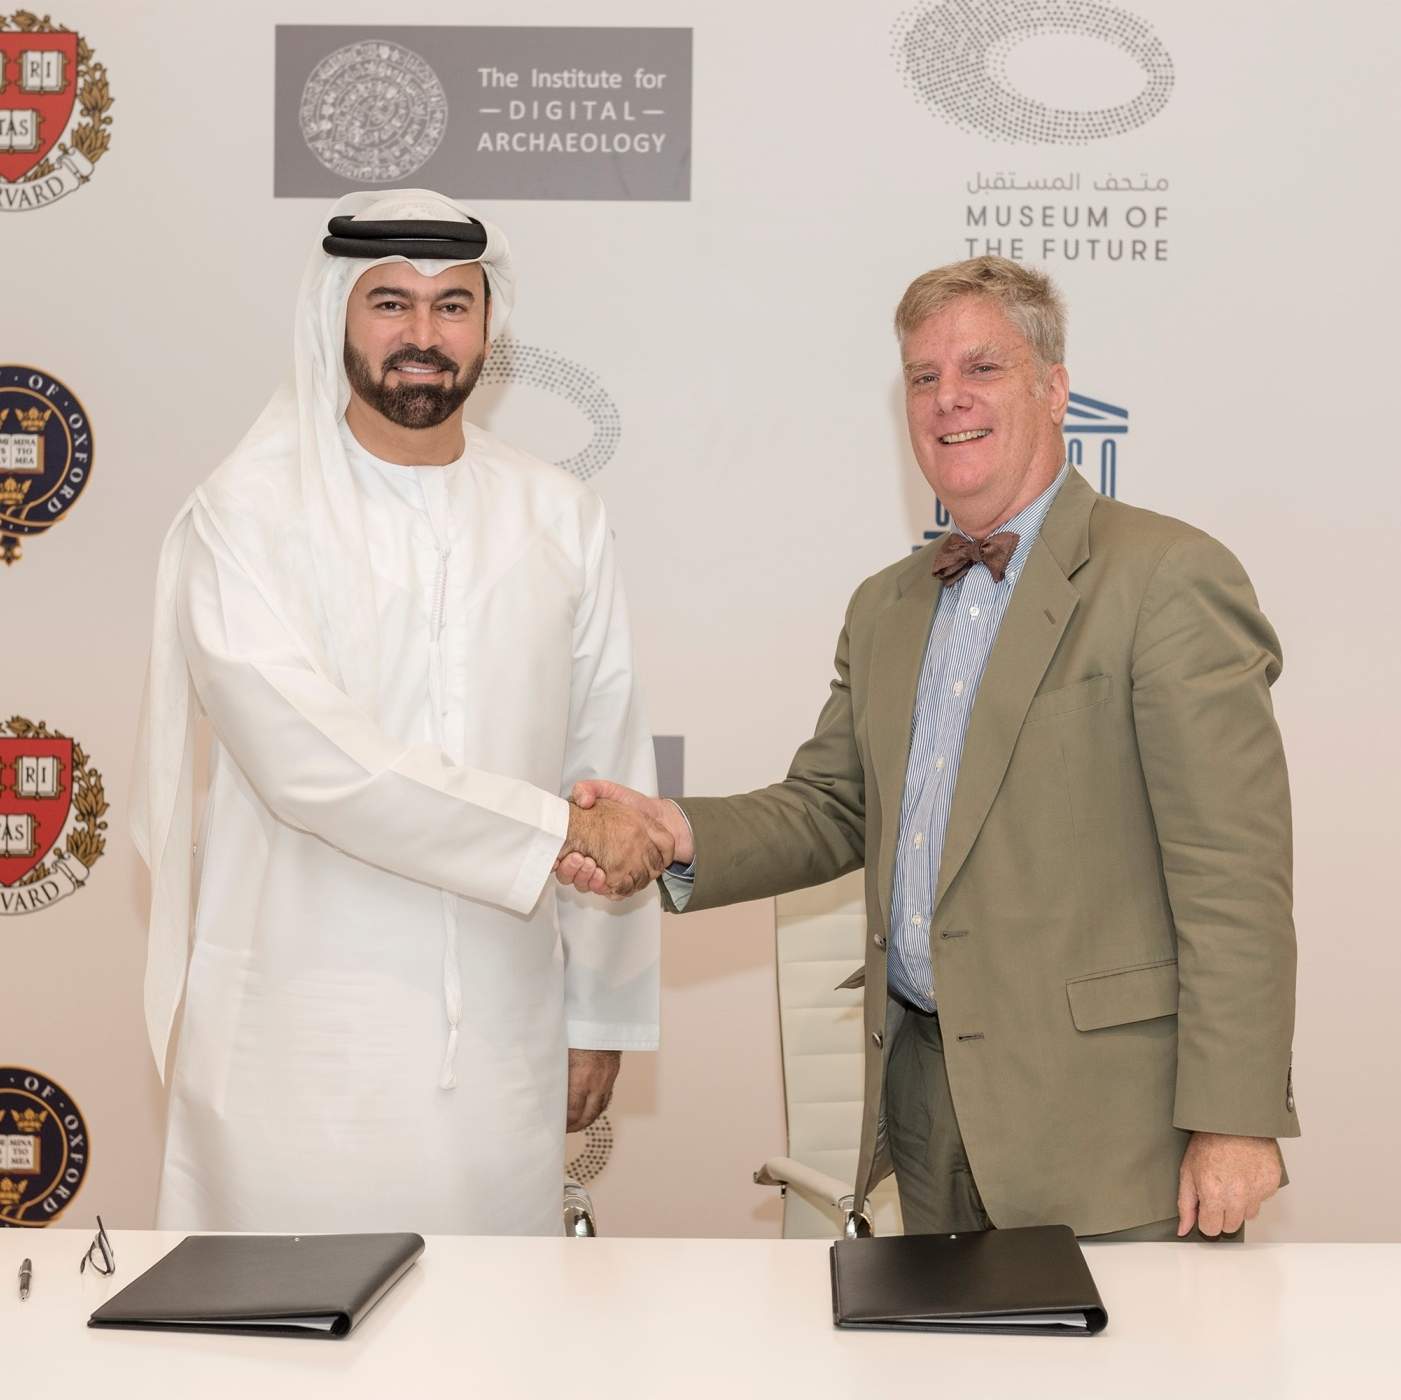 Dubai Museum of the Future Partners with UNESCO, UK-based Institute for Digital Archaeology to help preserve heritage sites in the region-ida1-1